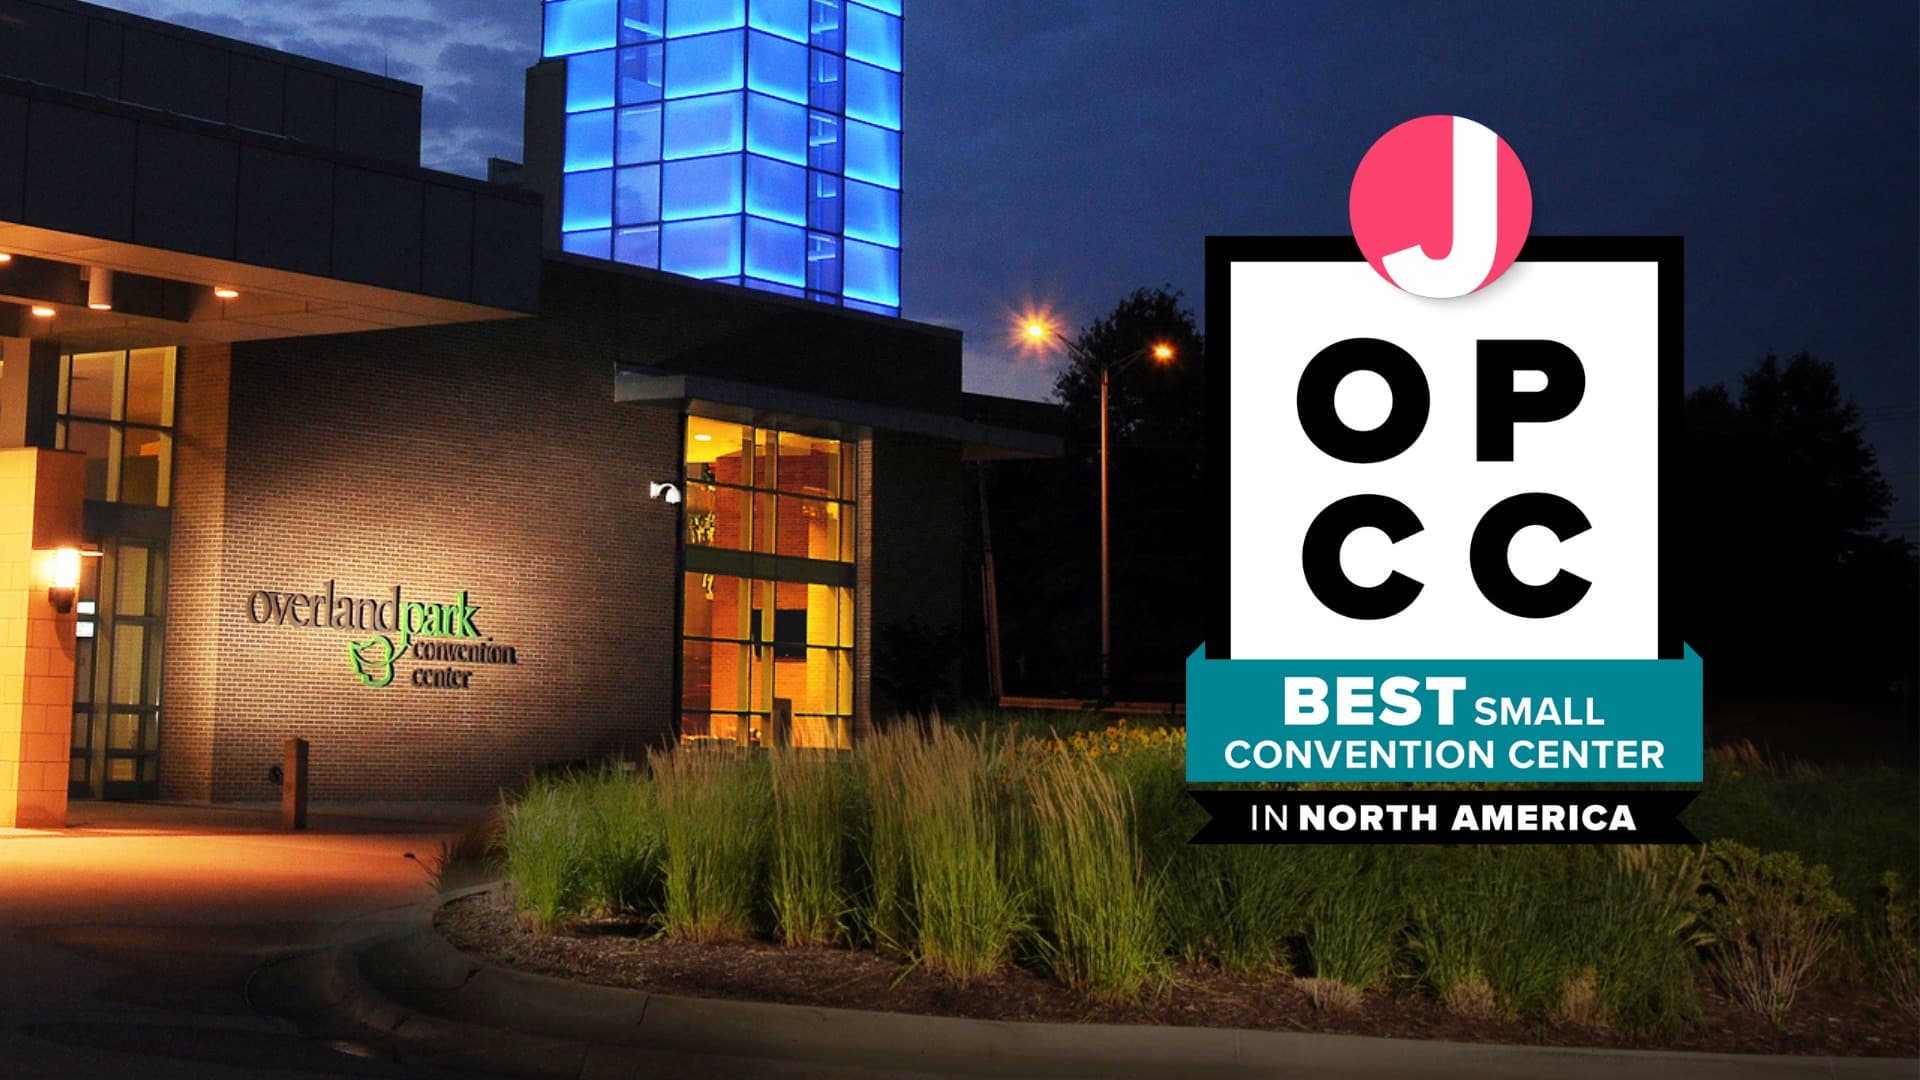 OPCC - Best Small Convention Center